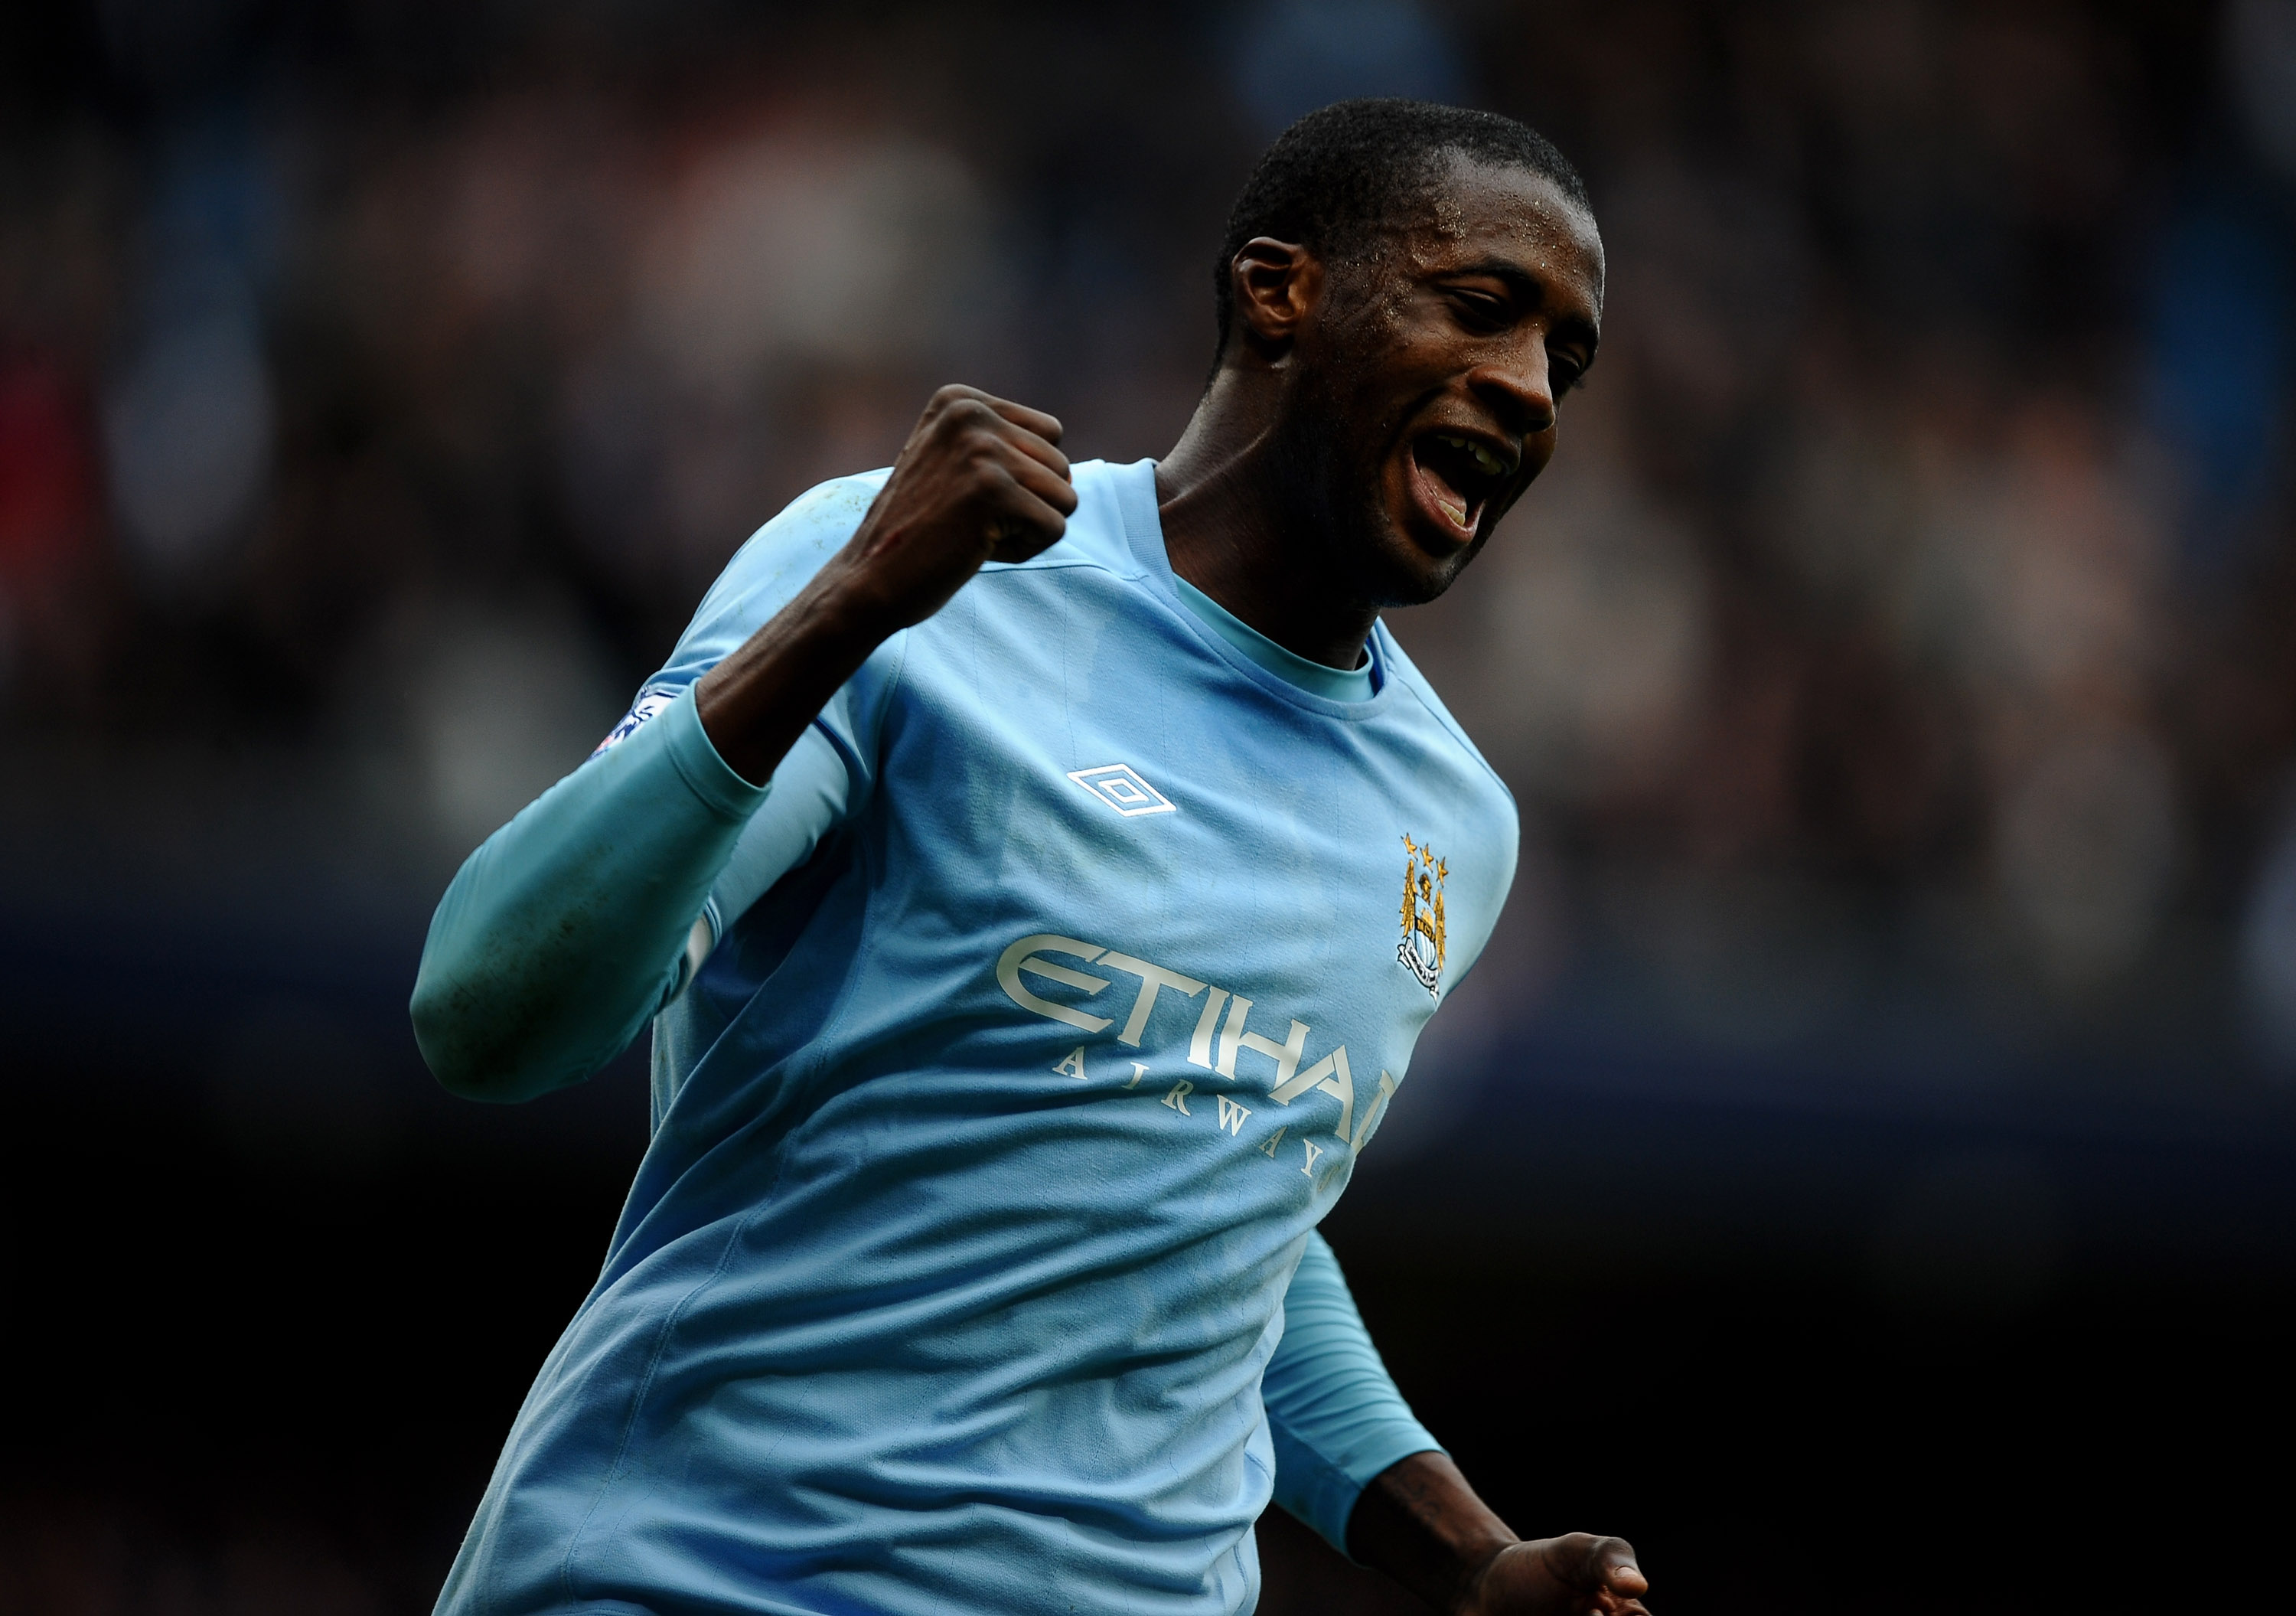 MANCHESTER, ENGLAND - APRIL 03:  Yaya Toure of Manchester City celebrates scoring his team's fifth goal during the Barclays Premier League match between Manchester City and Sunderland at the City of Manchester Stadium on April 3, 2011 in Manchester, Engla